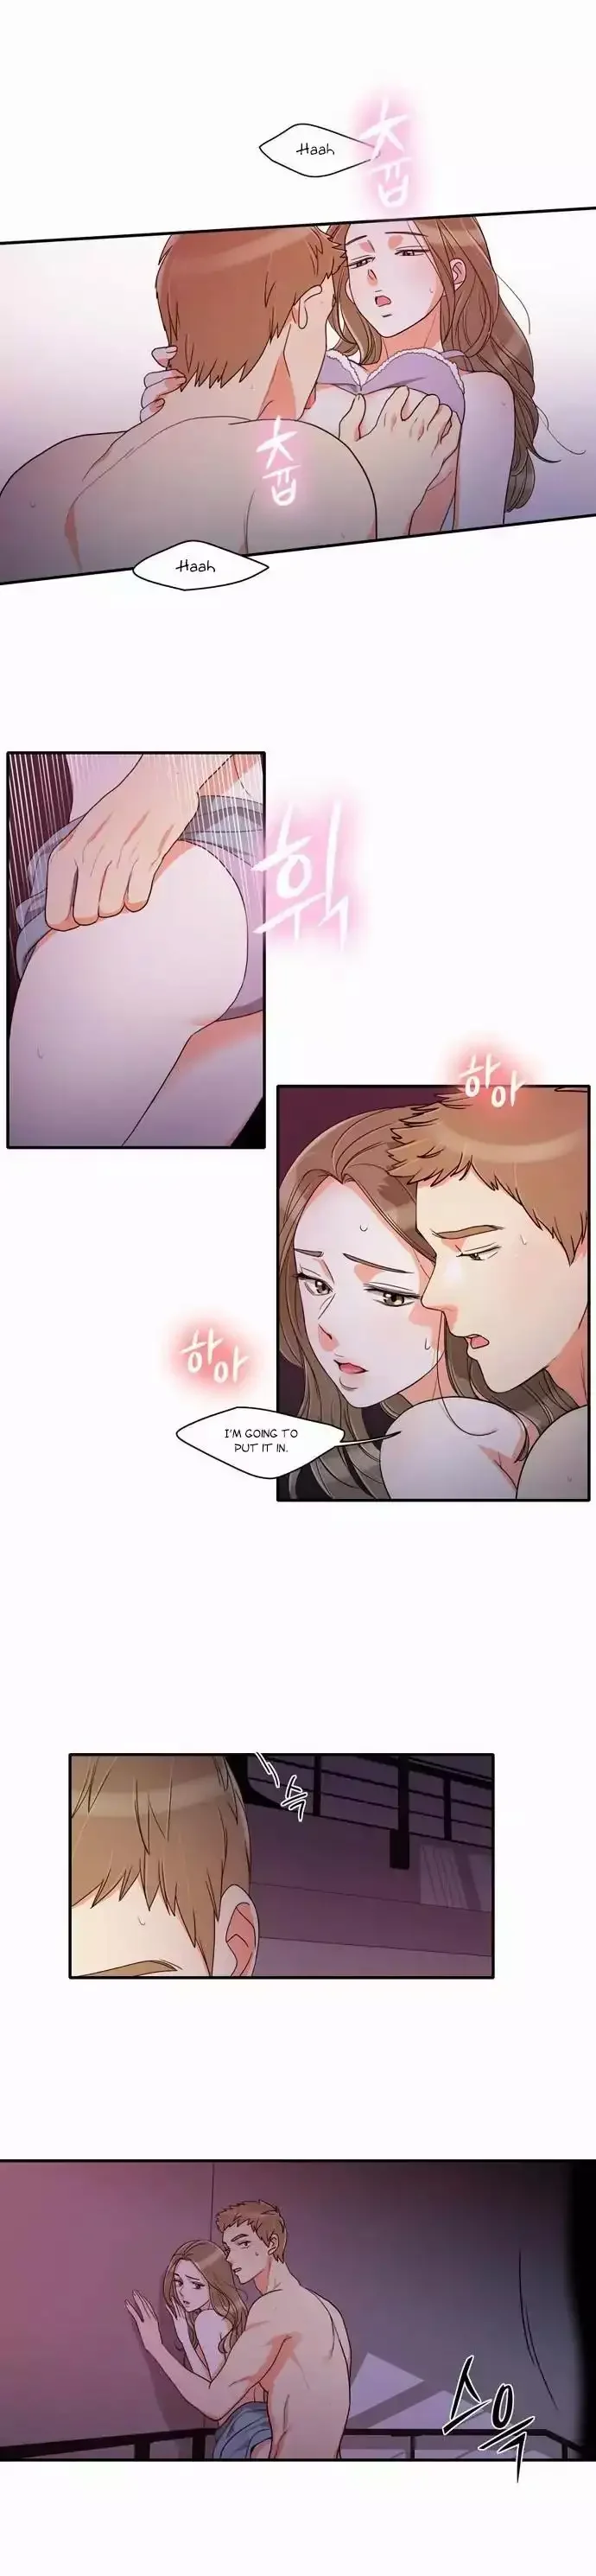 do-it-one-more-time-chap-30-1